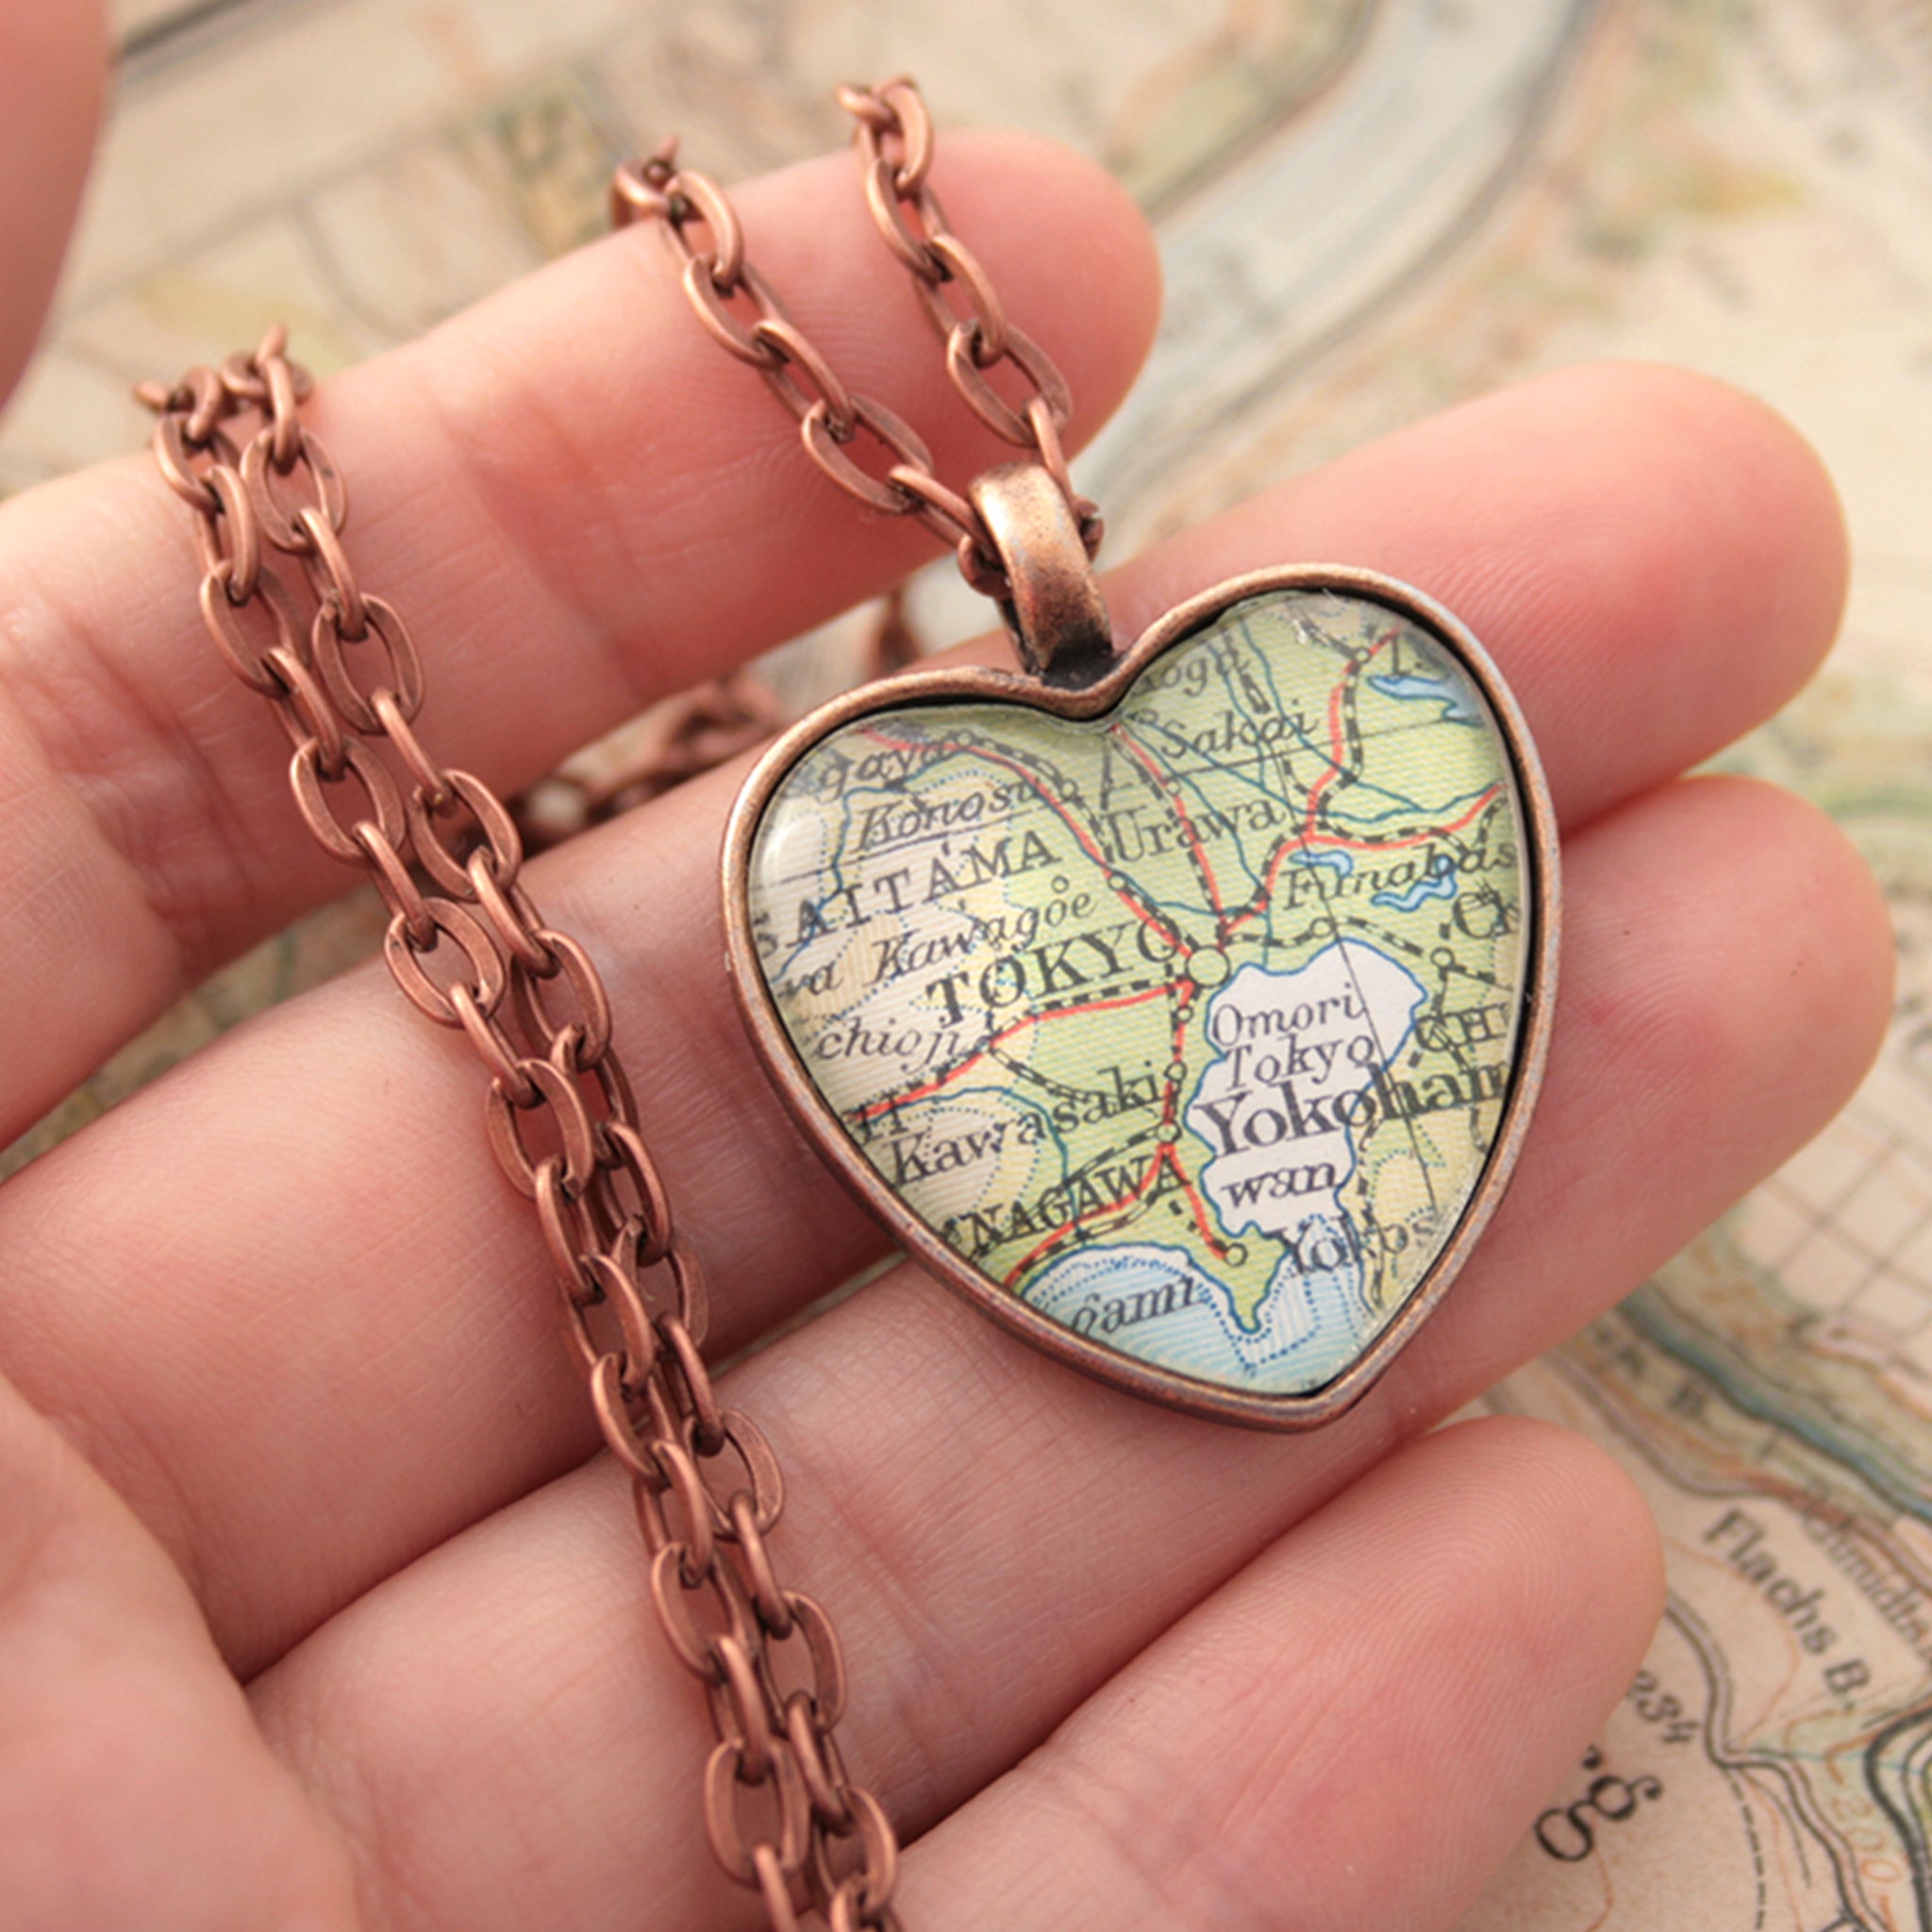 Hold in hand heart shaped pendant necklace in copper tone featuring map of Tokyo